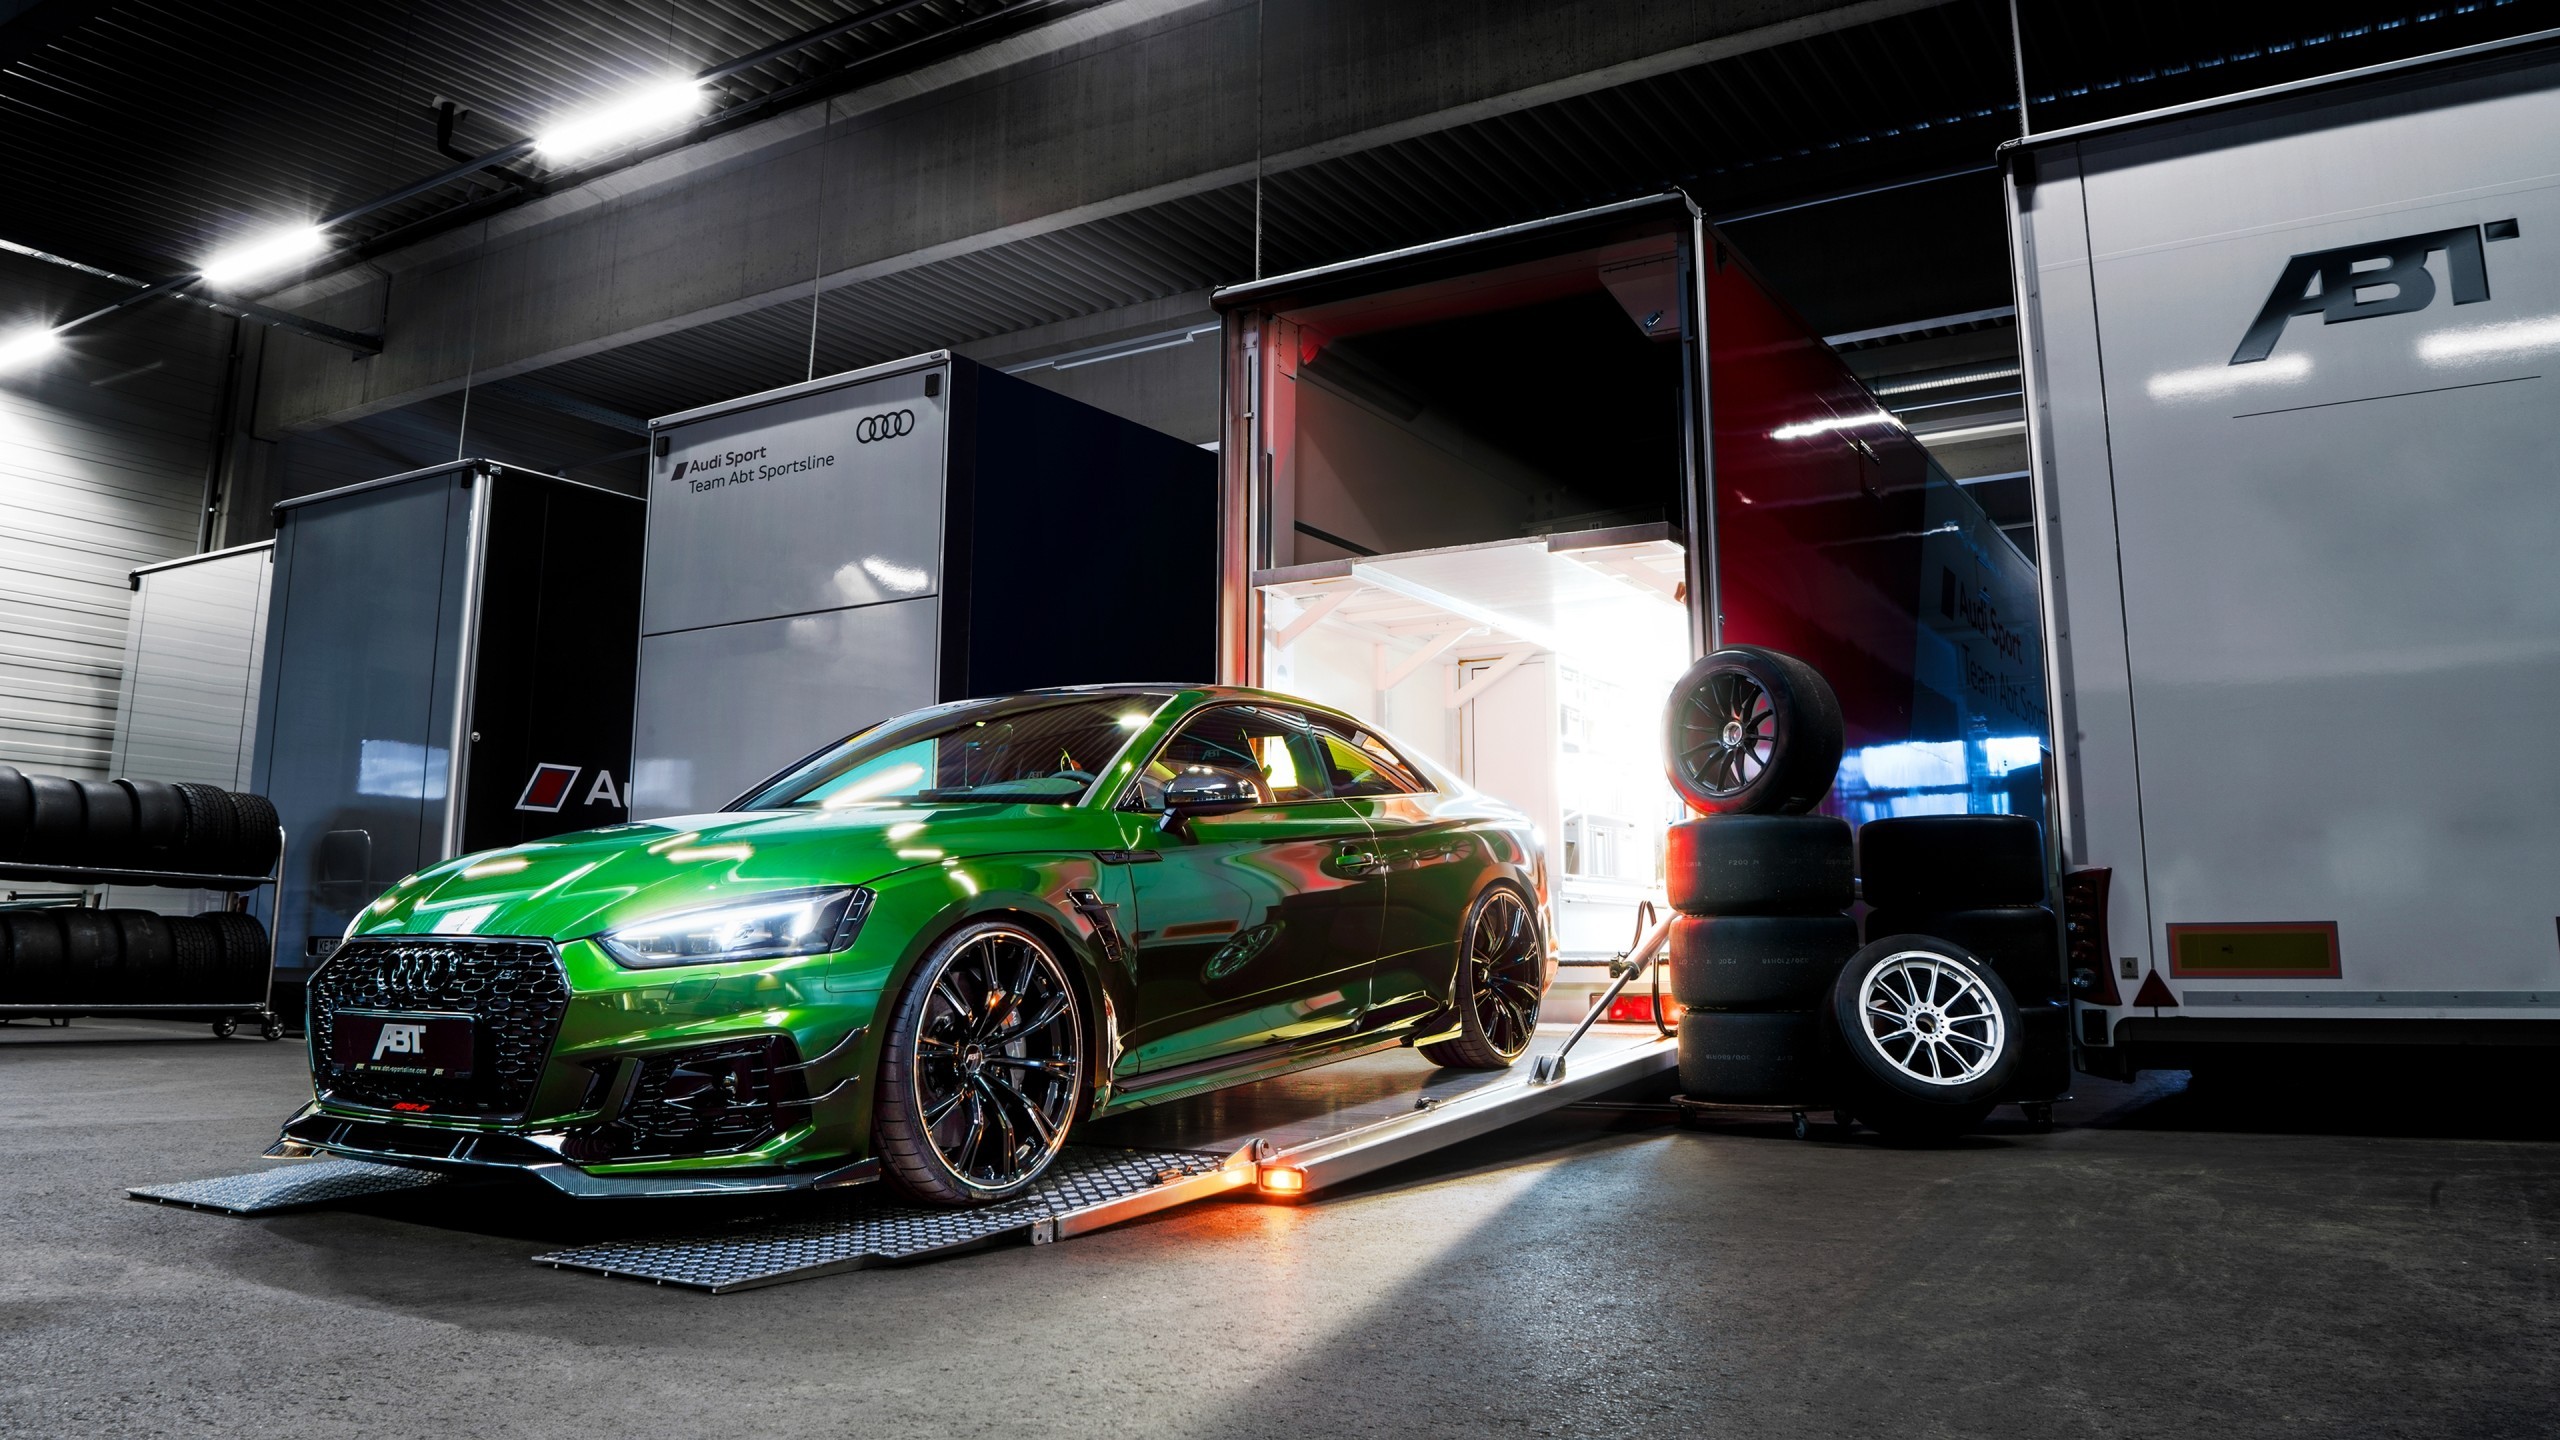 Audi Rs5-r Coupe, Green, Tuning, Luxury, Cars - Audi Abt - HD Wallpaper 